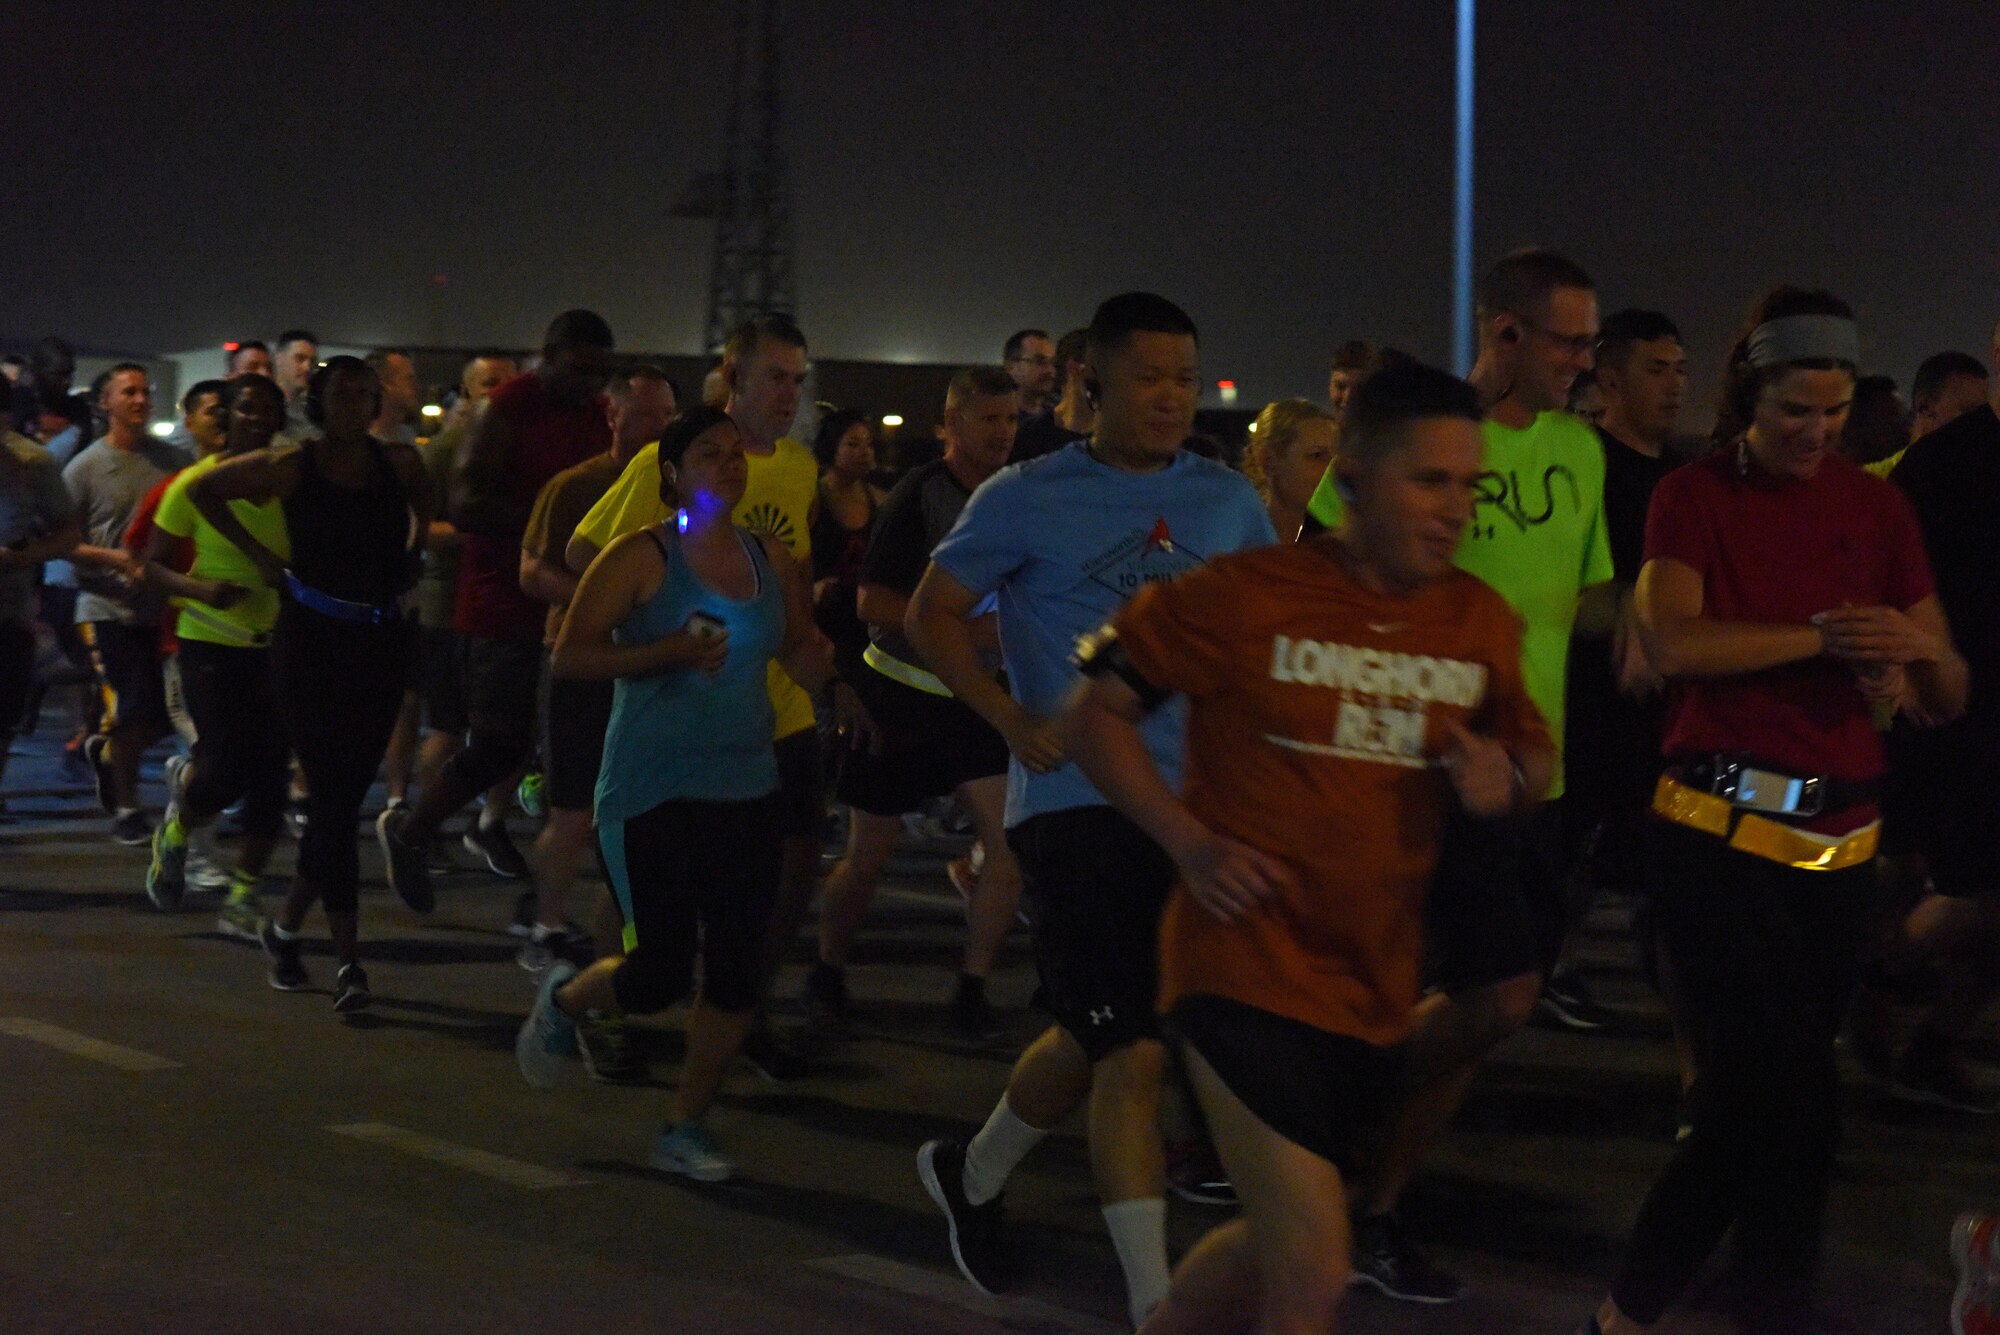 Base personnel dash through the starting line of a 5K race commemorating  the 75th anniversary of the attack on Pearl Harbor at Al Udeid Air Base, Qatar, Dec. 7, 2016. Participants used the anniversary as an opportunity to come together and honor the sacrifice and dedication of those who perished and those who survived the attack, both civilian and military. (U.S. Air Force photo by Senior Airman Cynthia A. Innocenti)